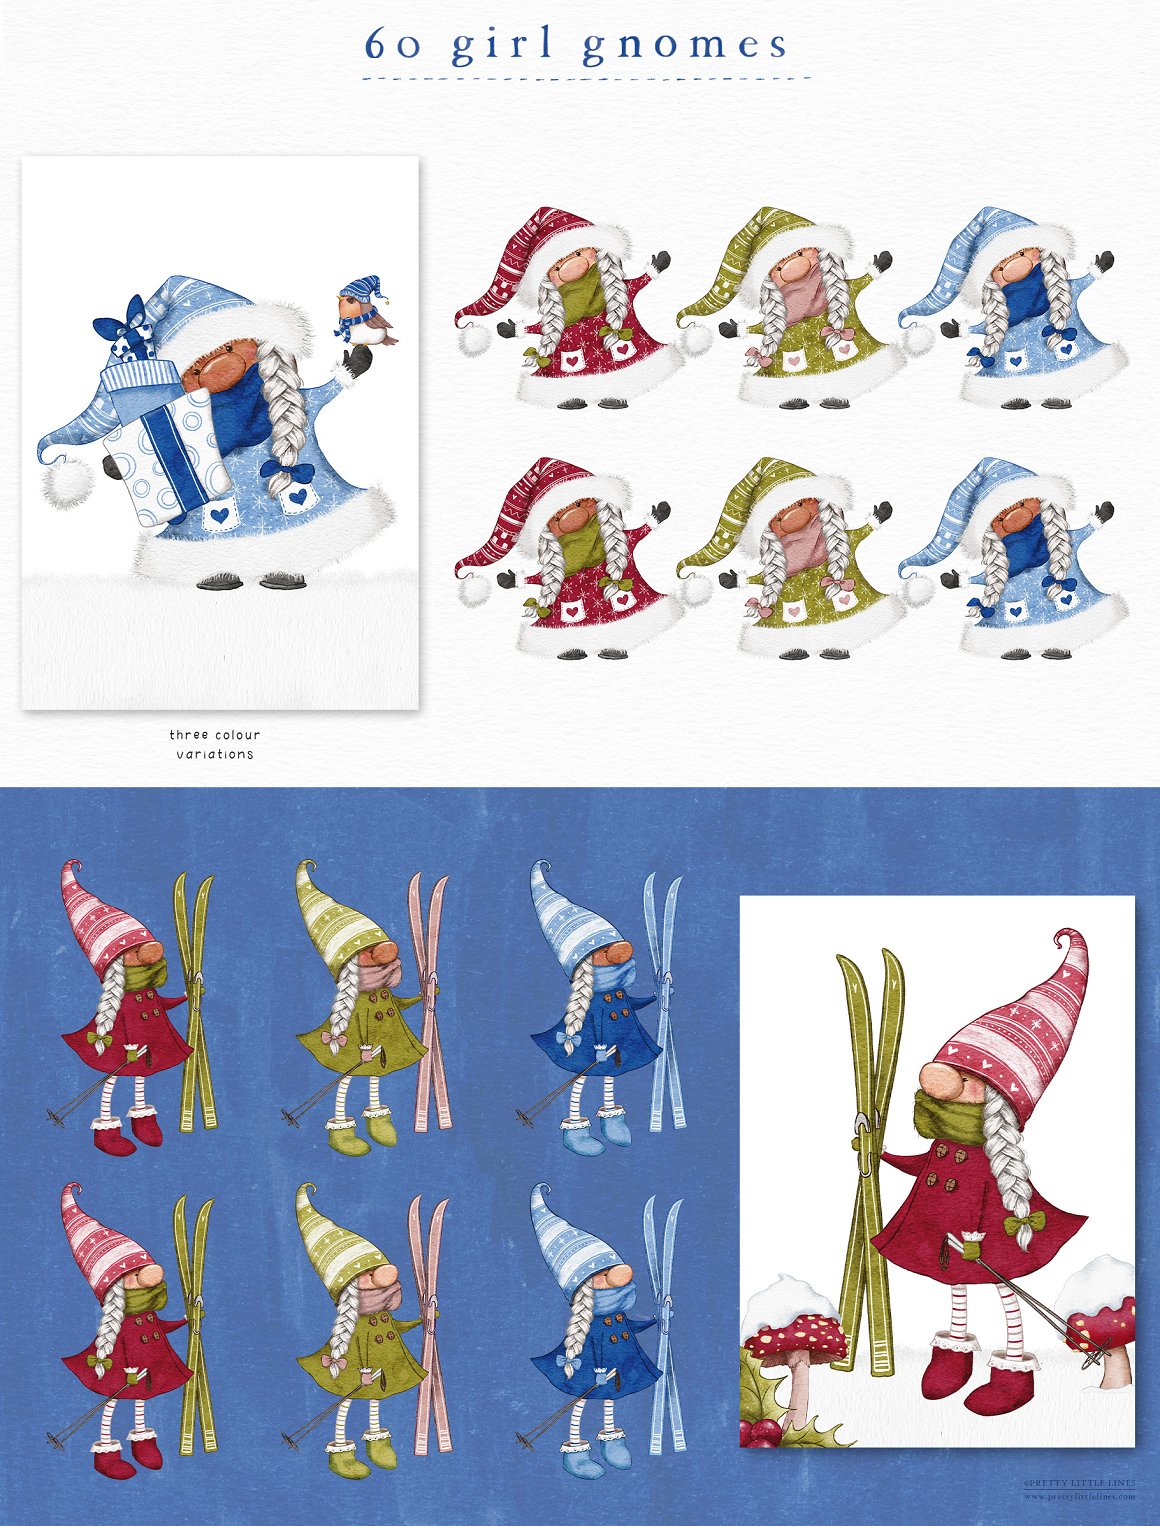 White and blue background with dwarfs in striped clothes.